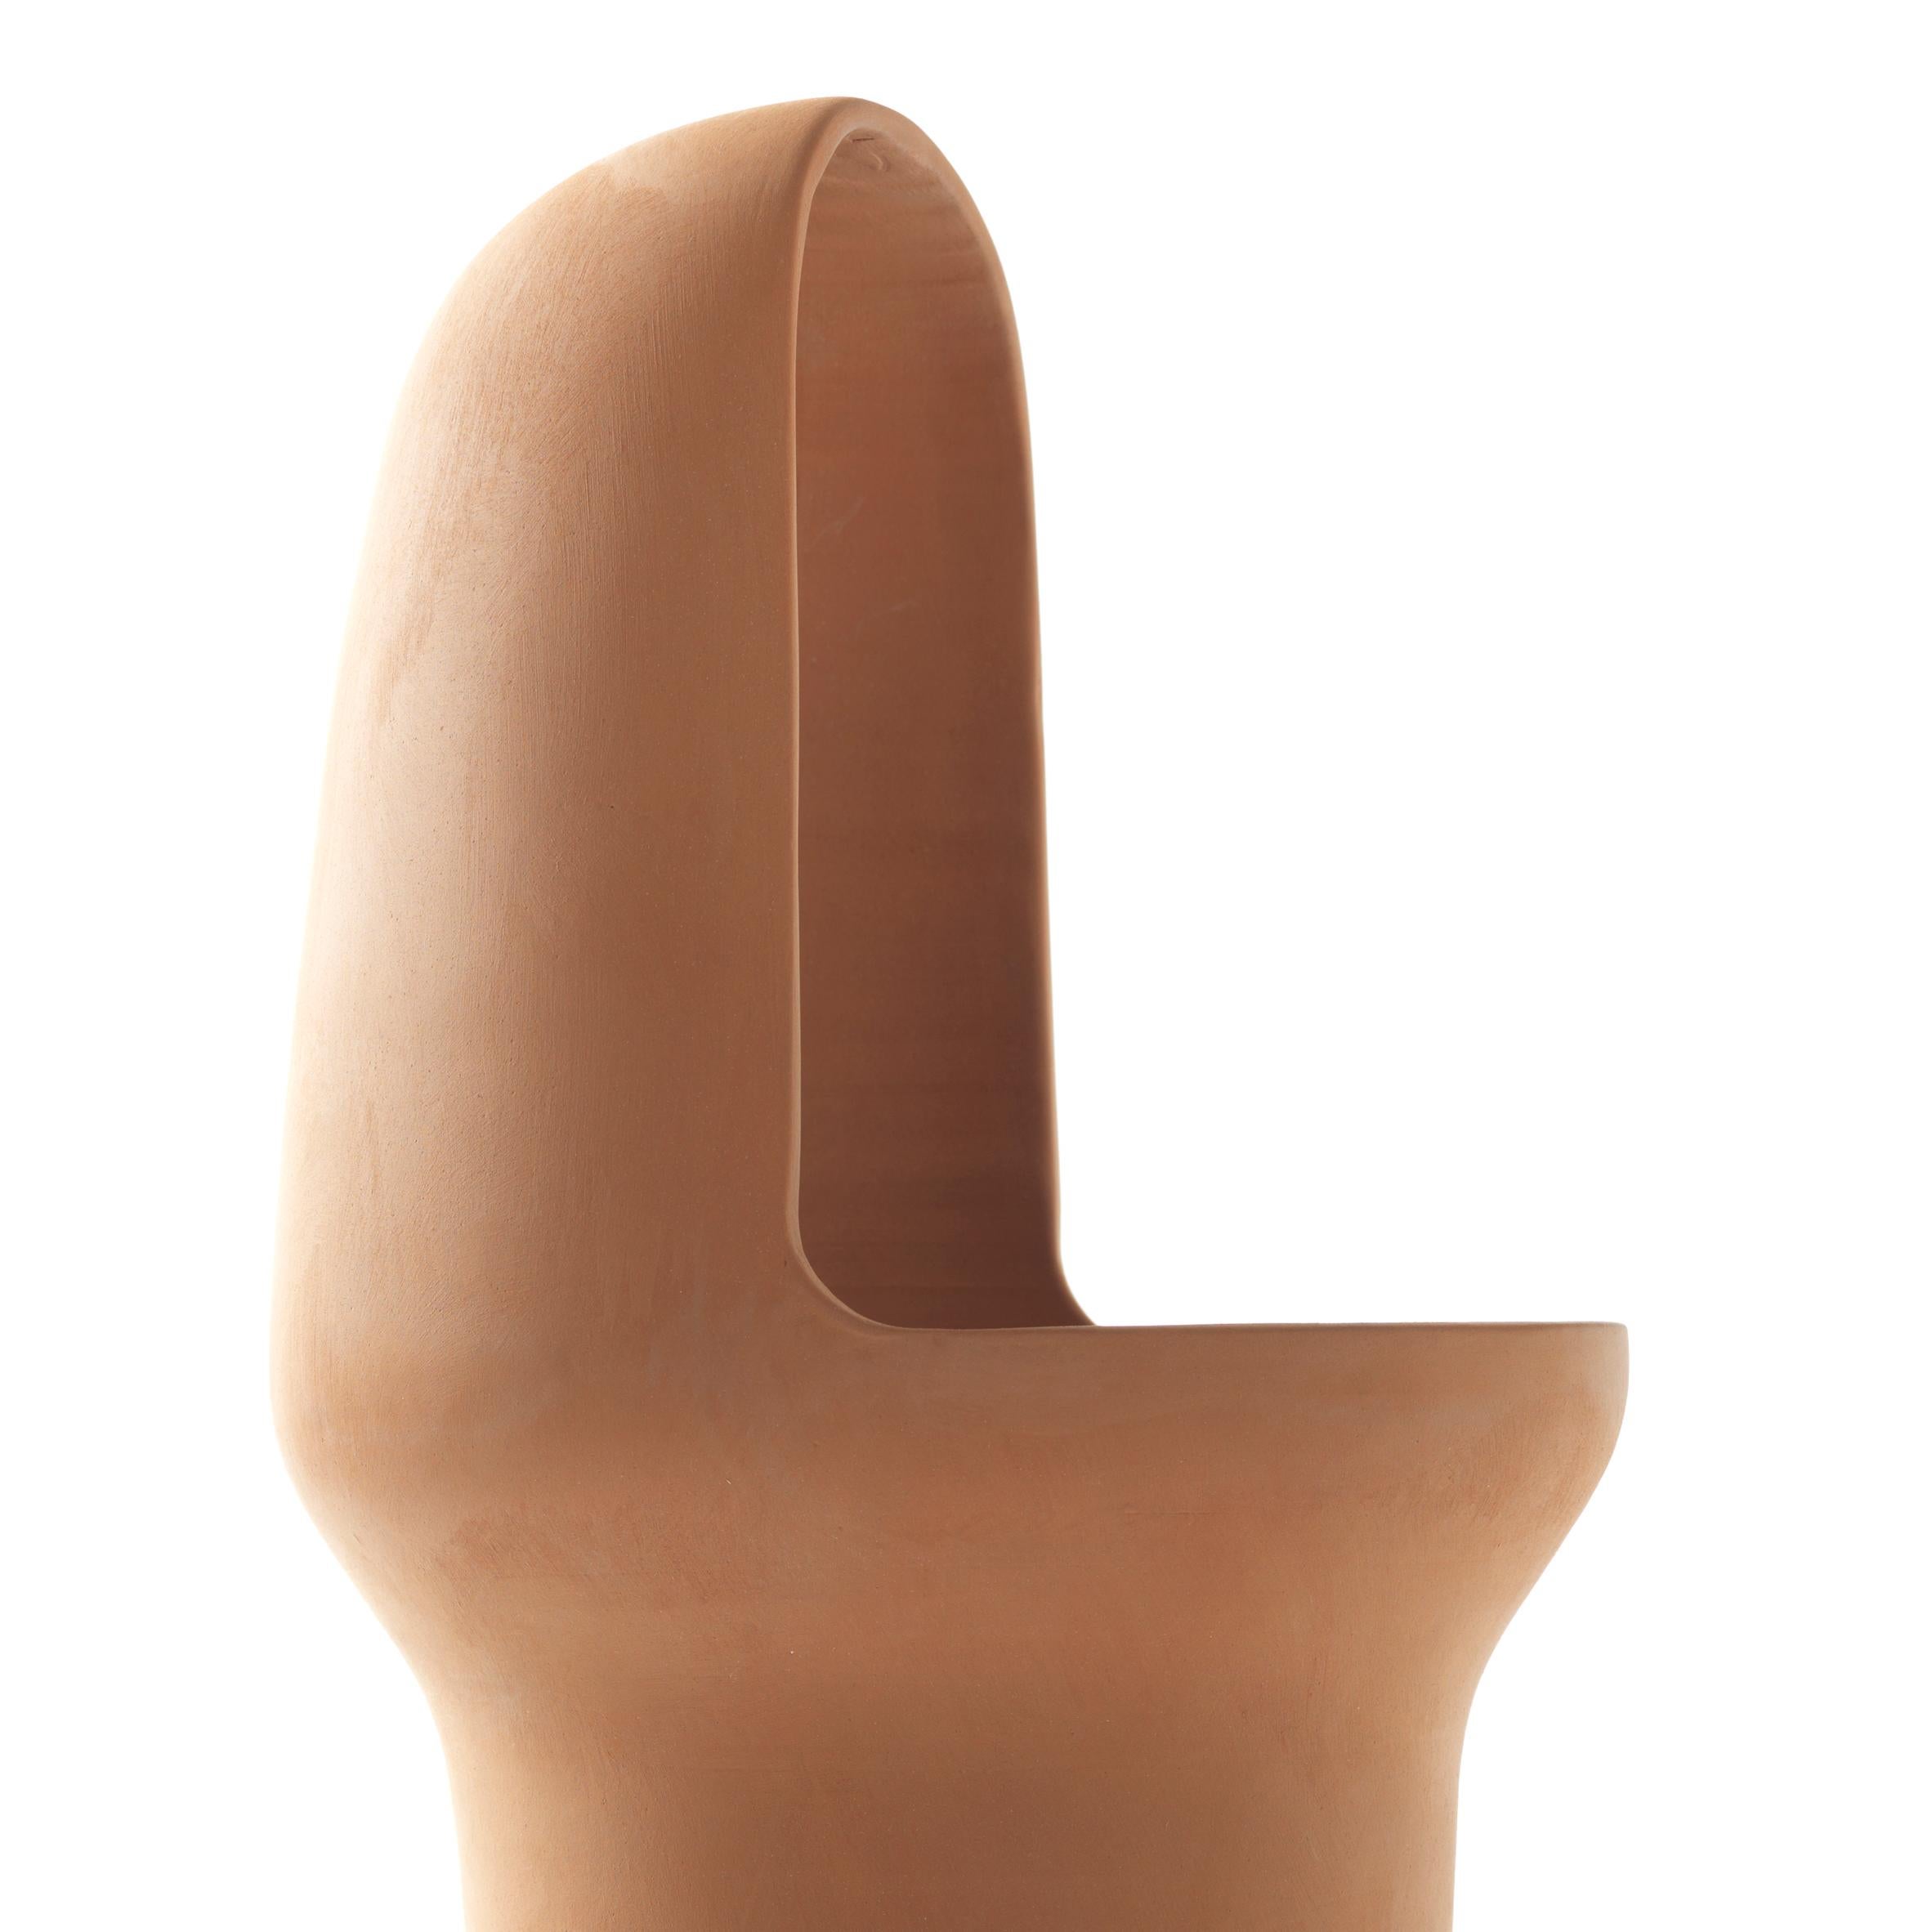 Gardenias vase nº 1 by Jaime Hayon.

Hand-turned terracotta with an impermeable treatment.